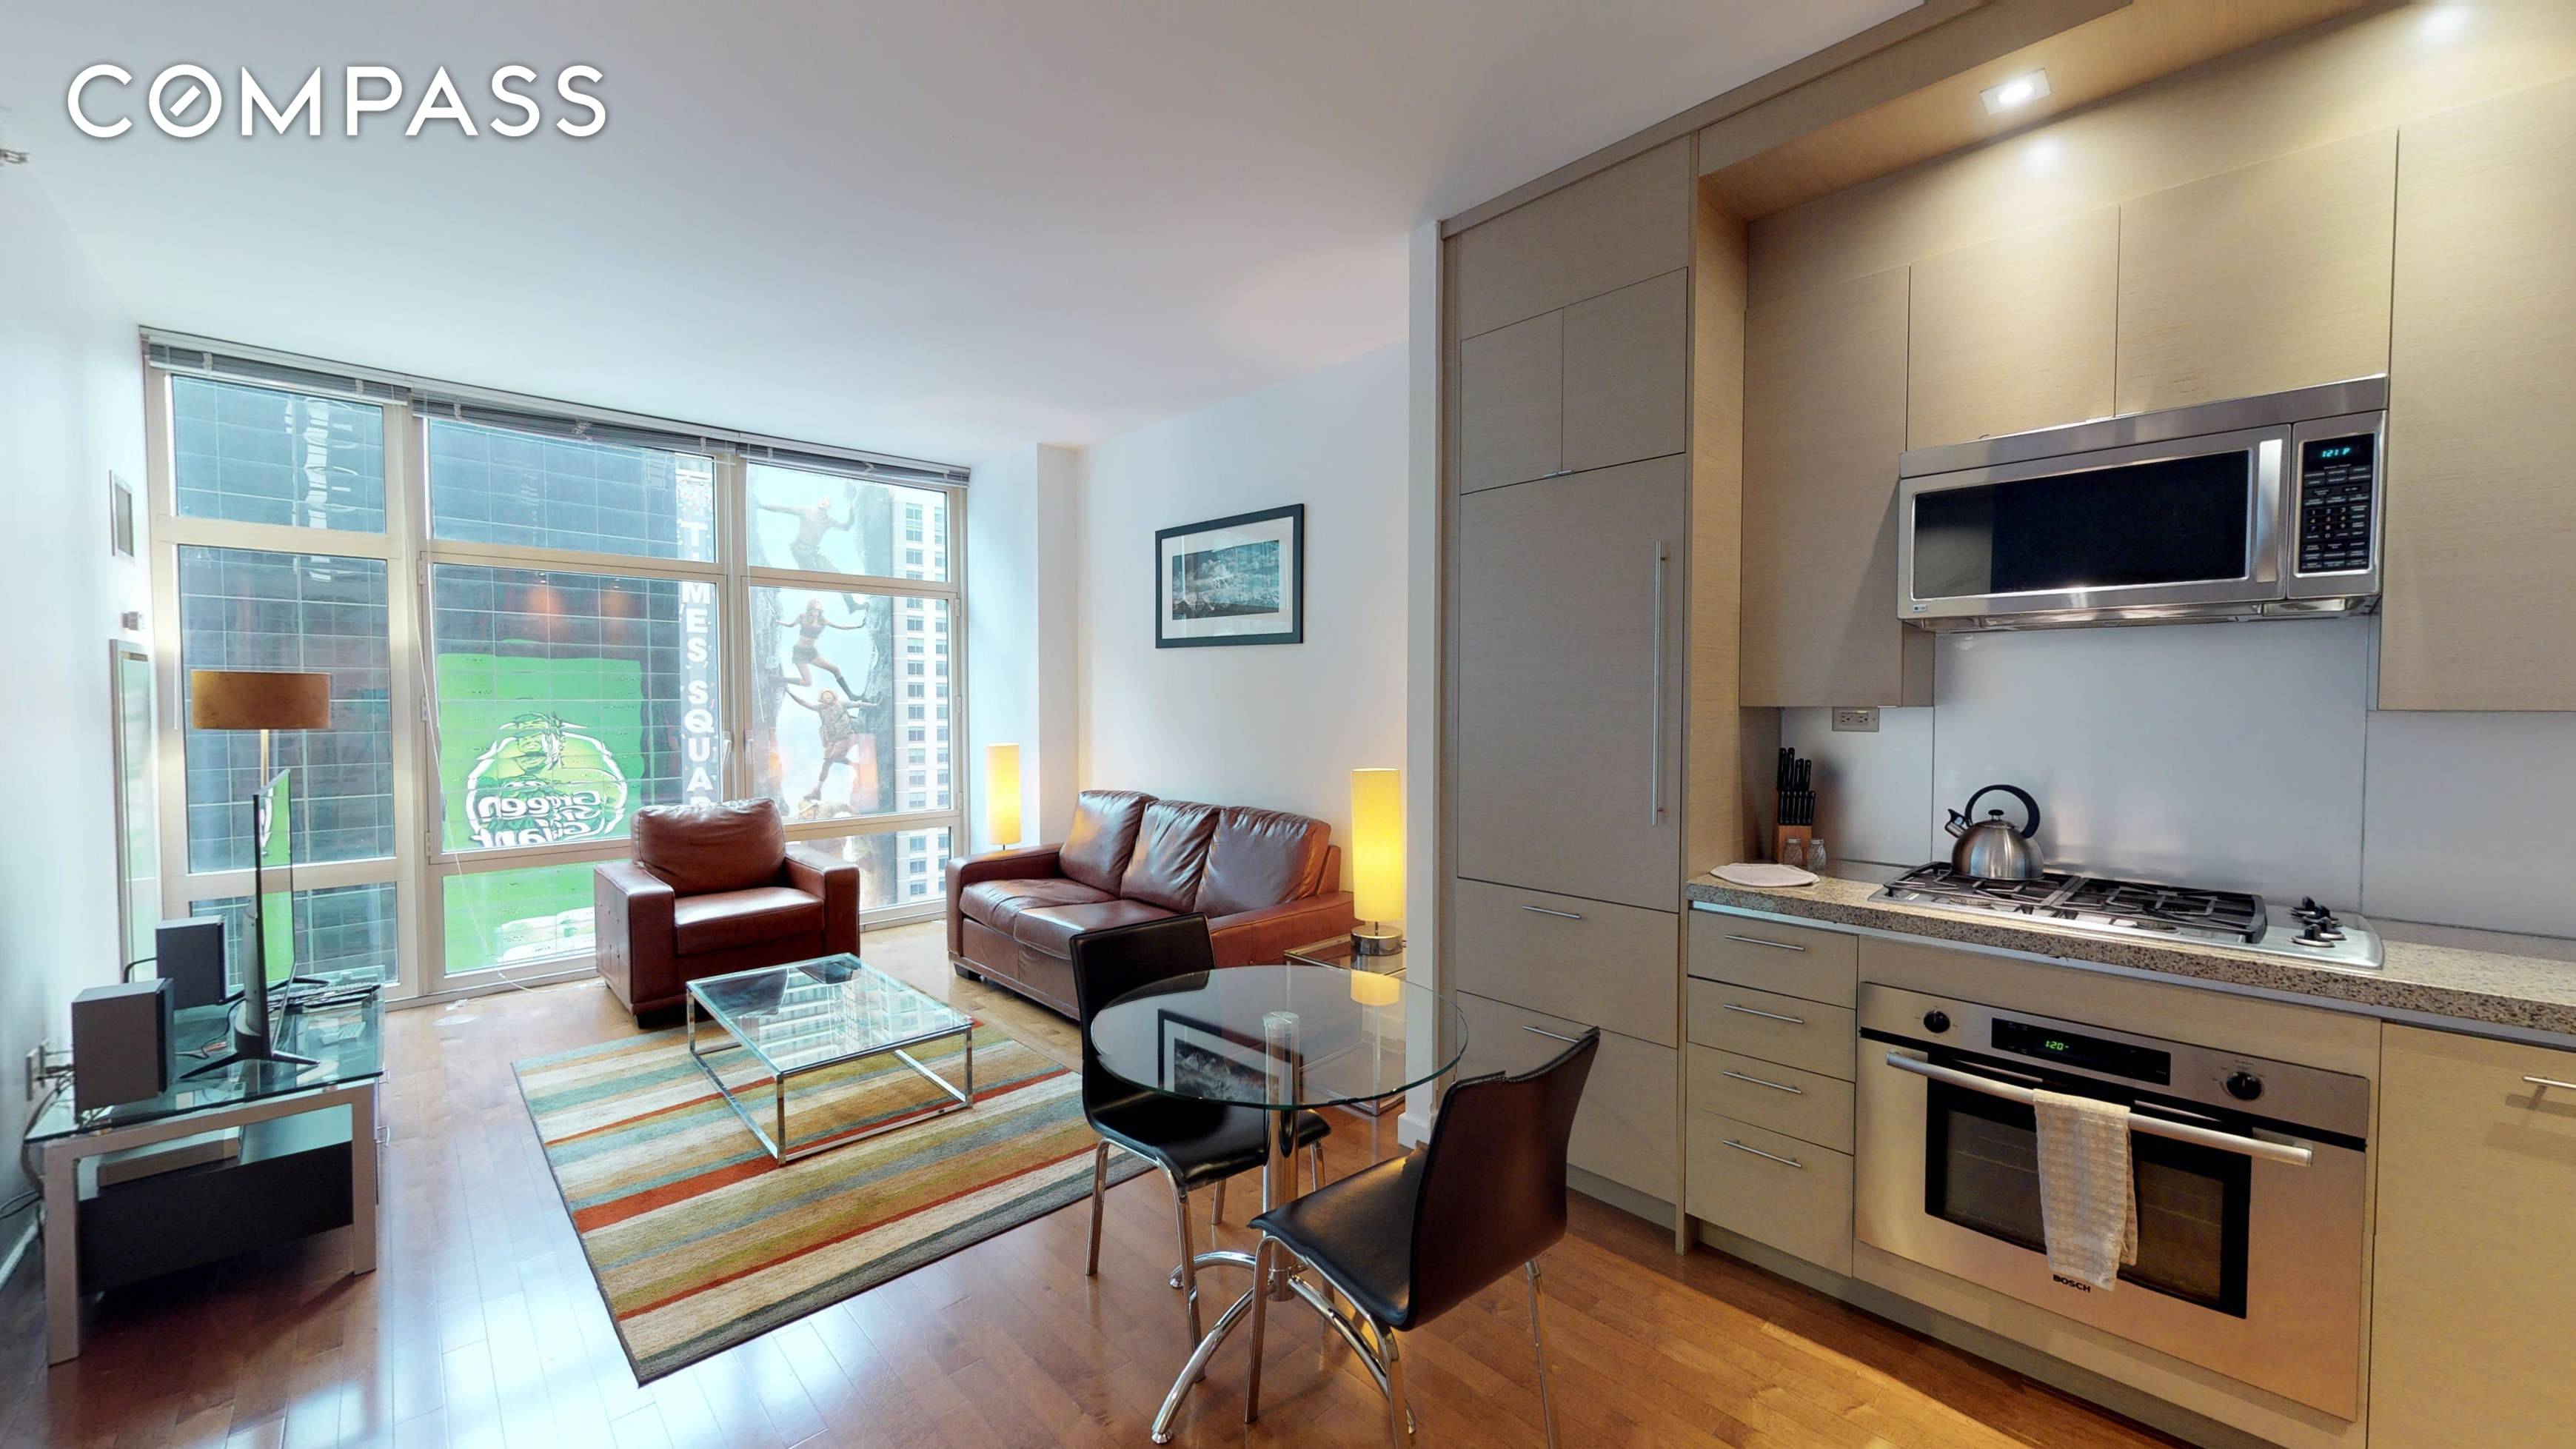 Outstanding sunny views abound in this spacious, quiet turn key retreat in the heart of NYC !